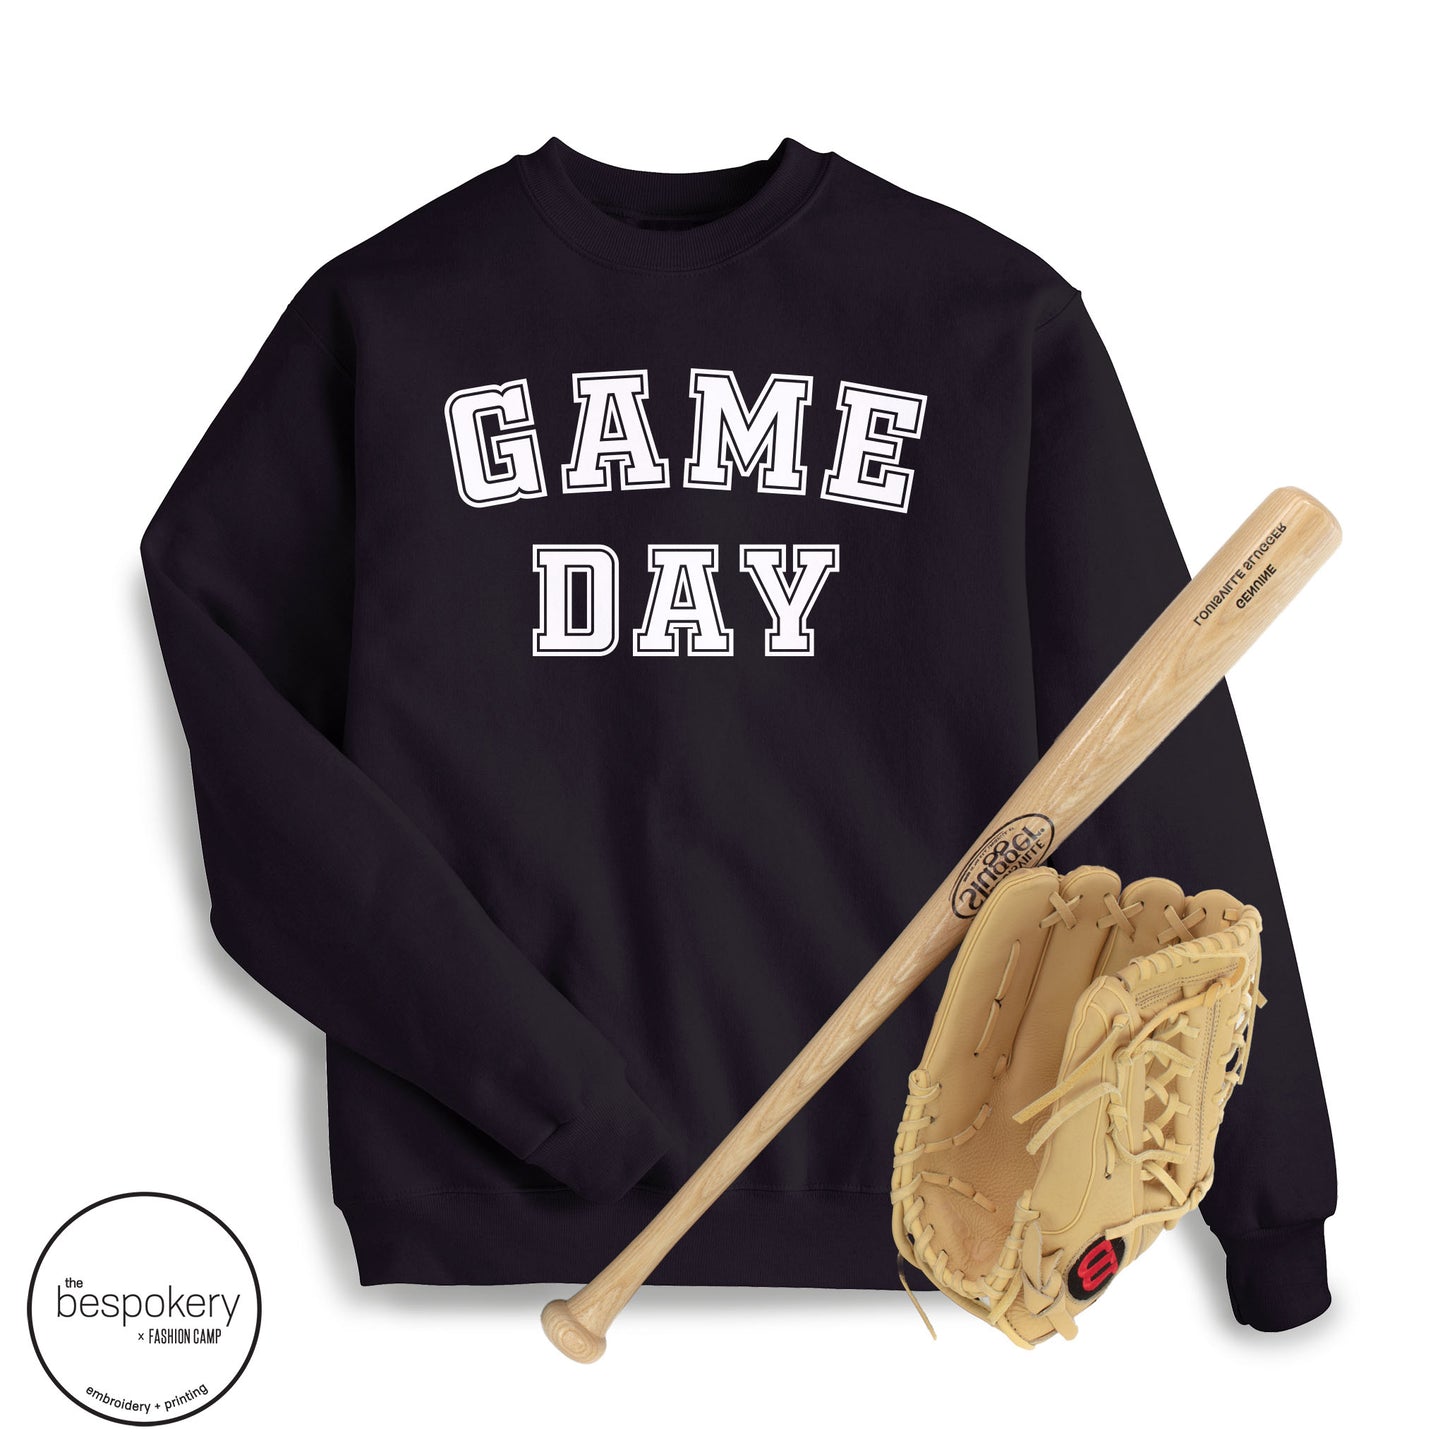 "Game Day" Black Sweatshirt - (Adult Only)